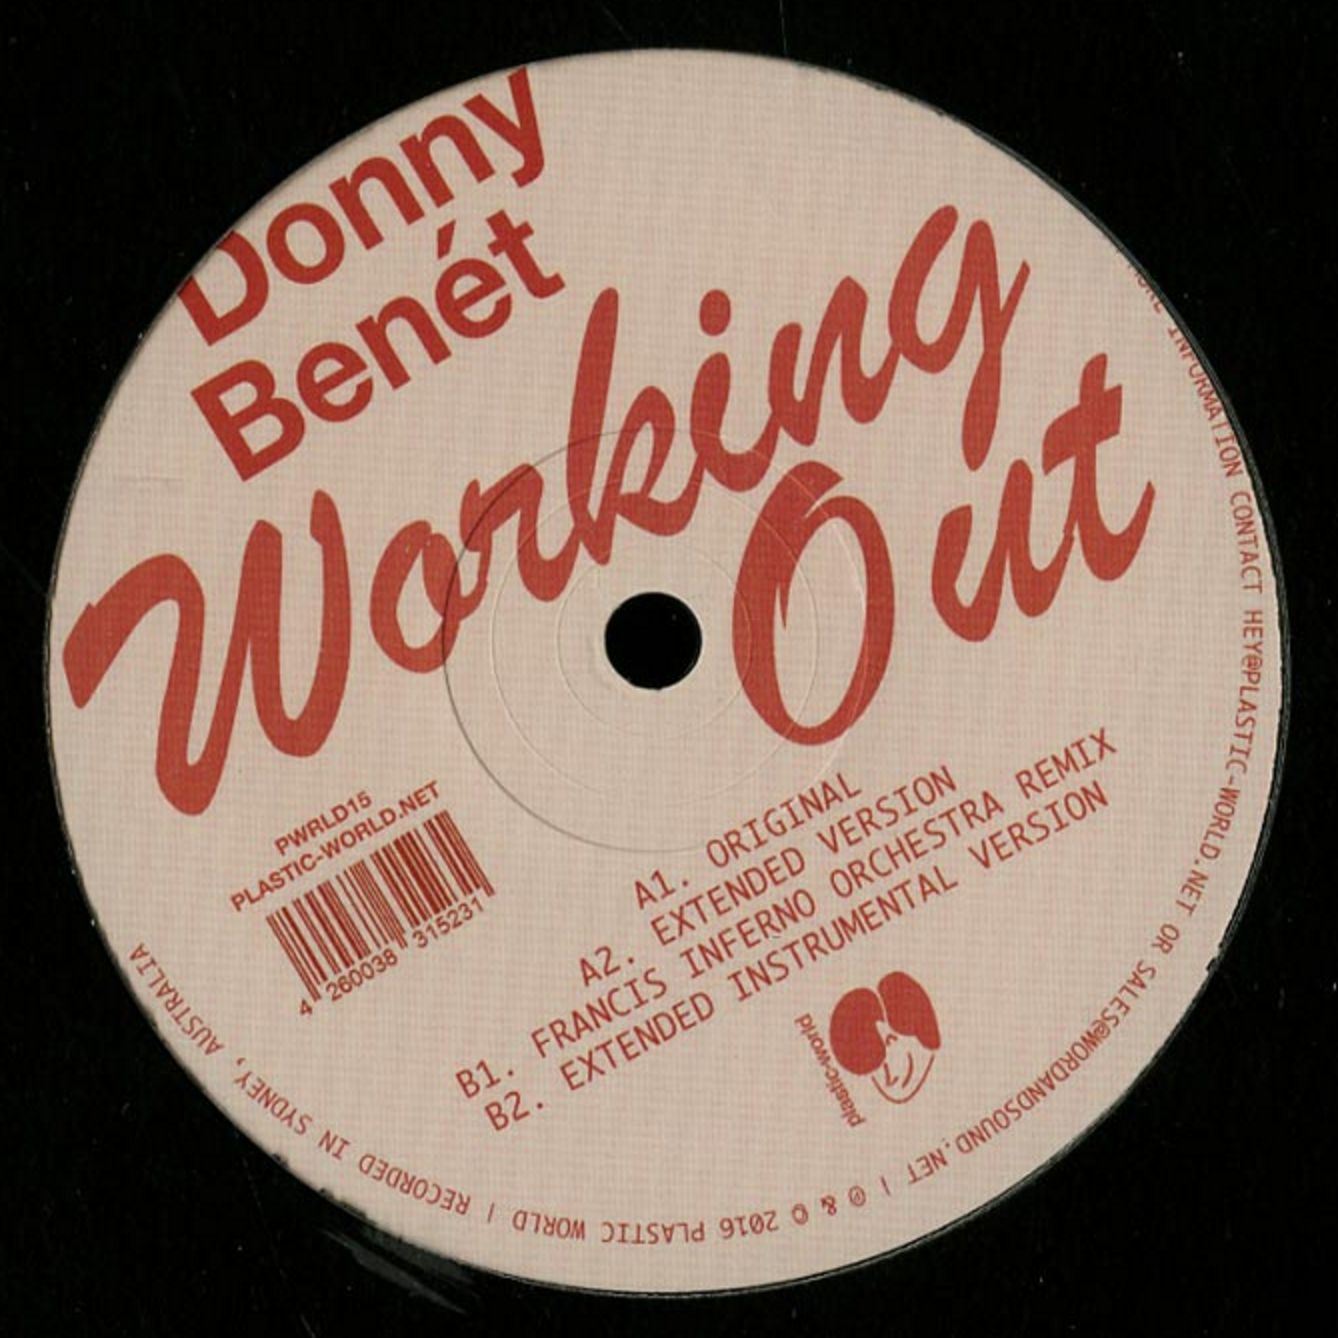 Stiahnuť ▼ Donny Benet - Working Out (FIO's Yarra Bend Reprise)